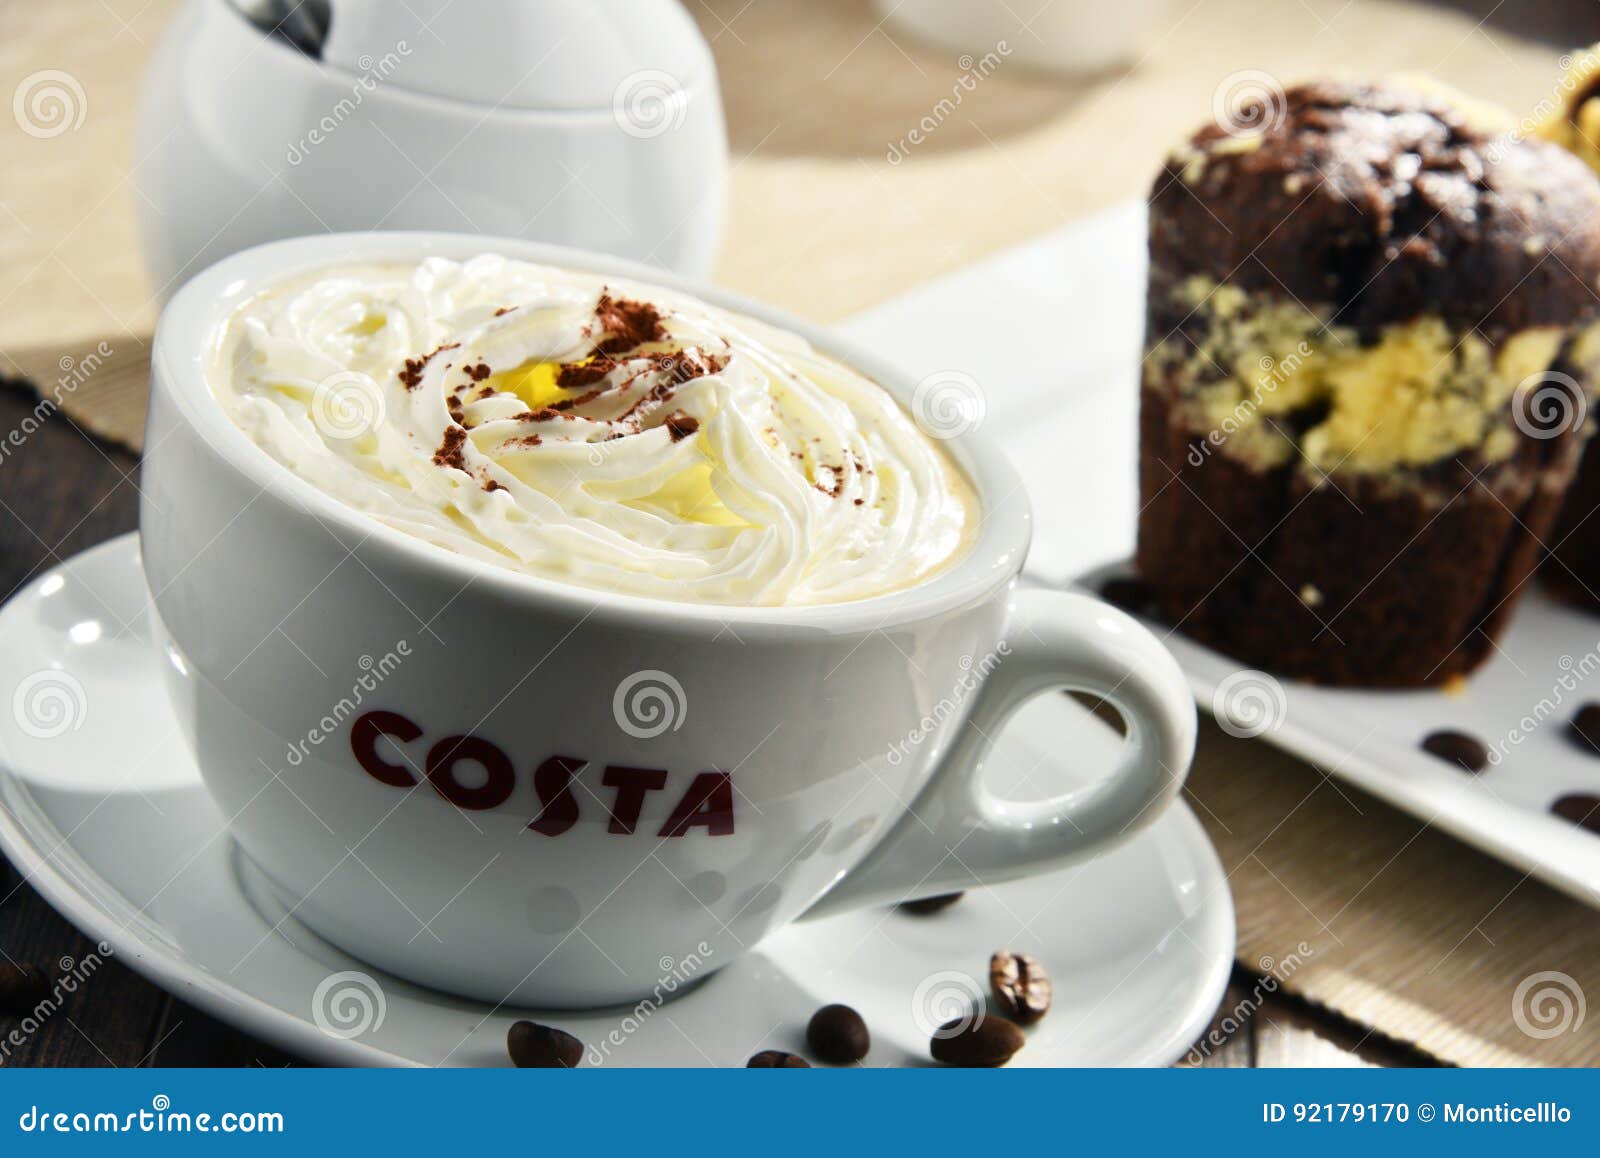 Cup Of Costa Coffee Coffee And Muffins Editorial Image Image Of